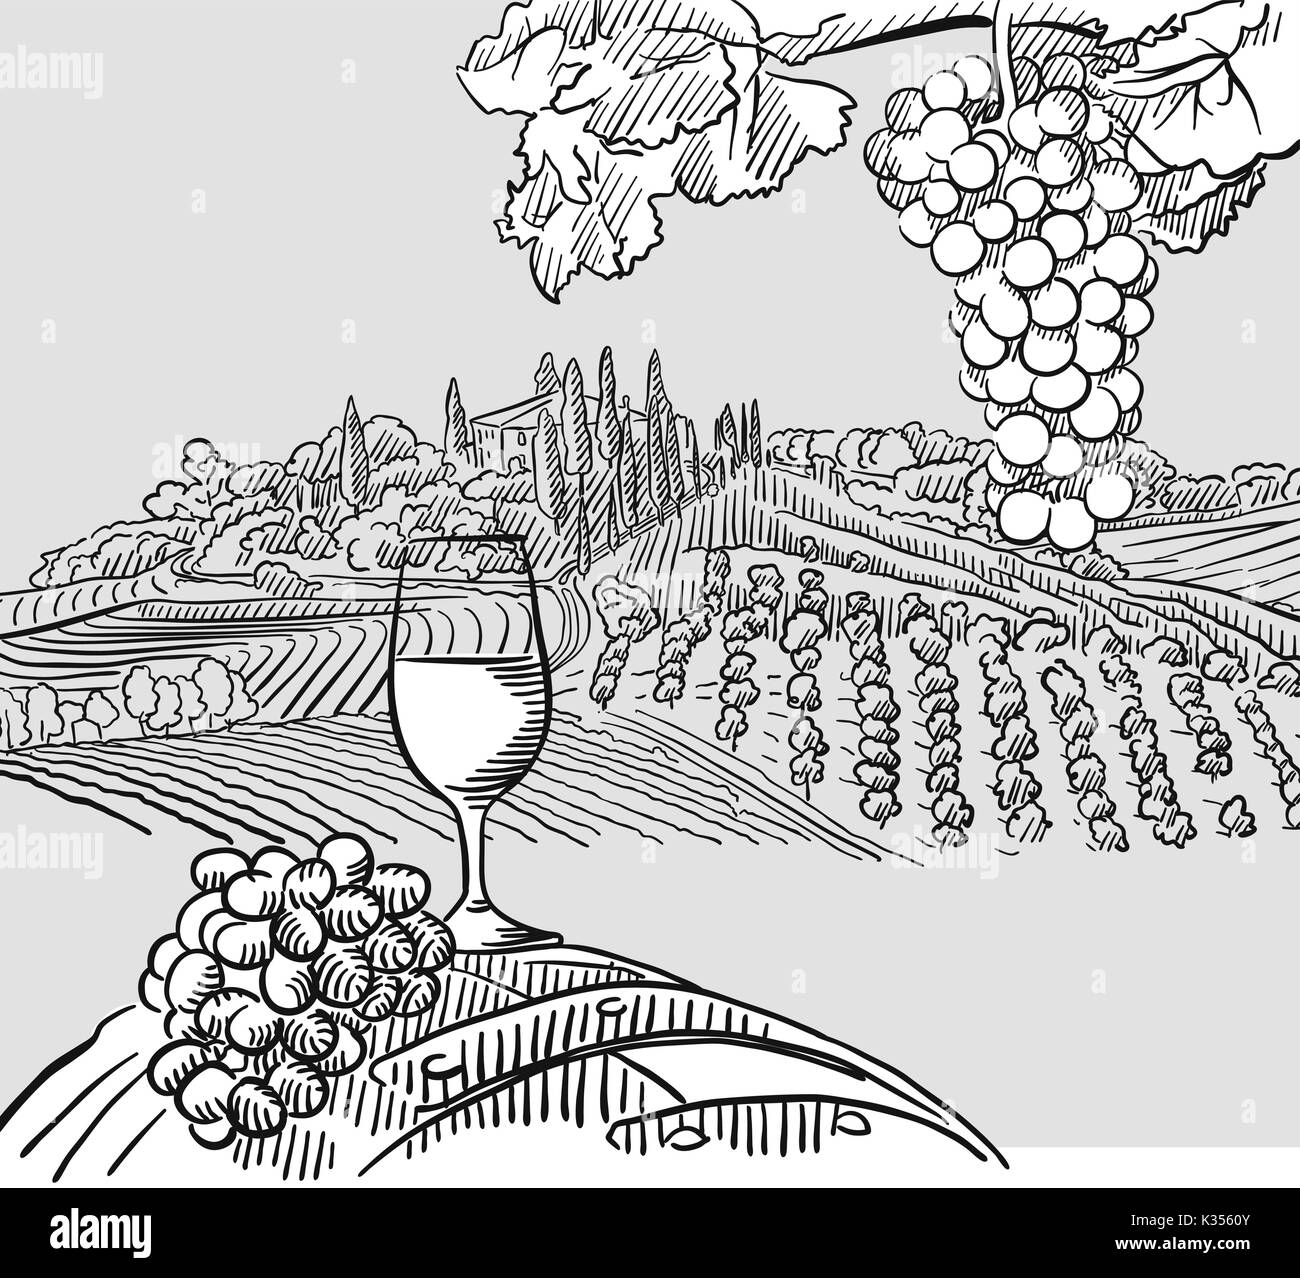 Wine barrel grapes and landscape Illustration. Hand drawn healthy food sketch. Black and White Vector Drawing on Blackboard. Stock Vector